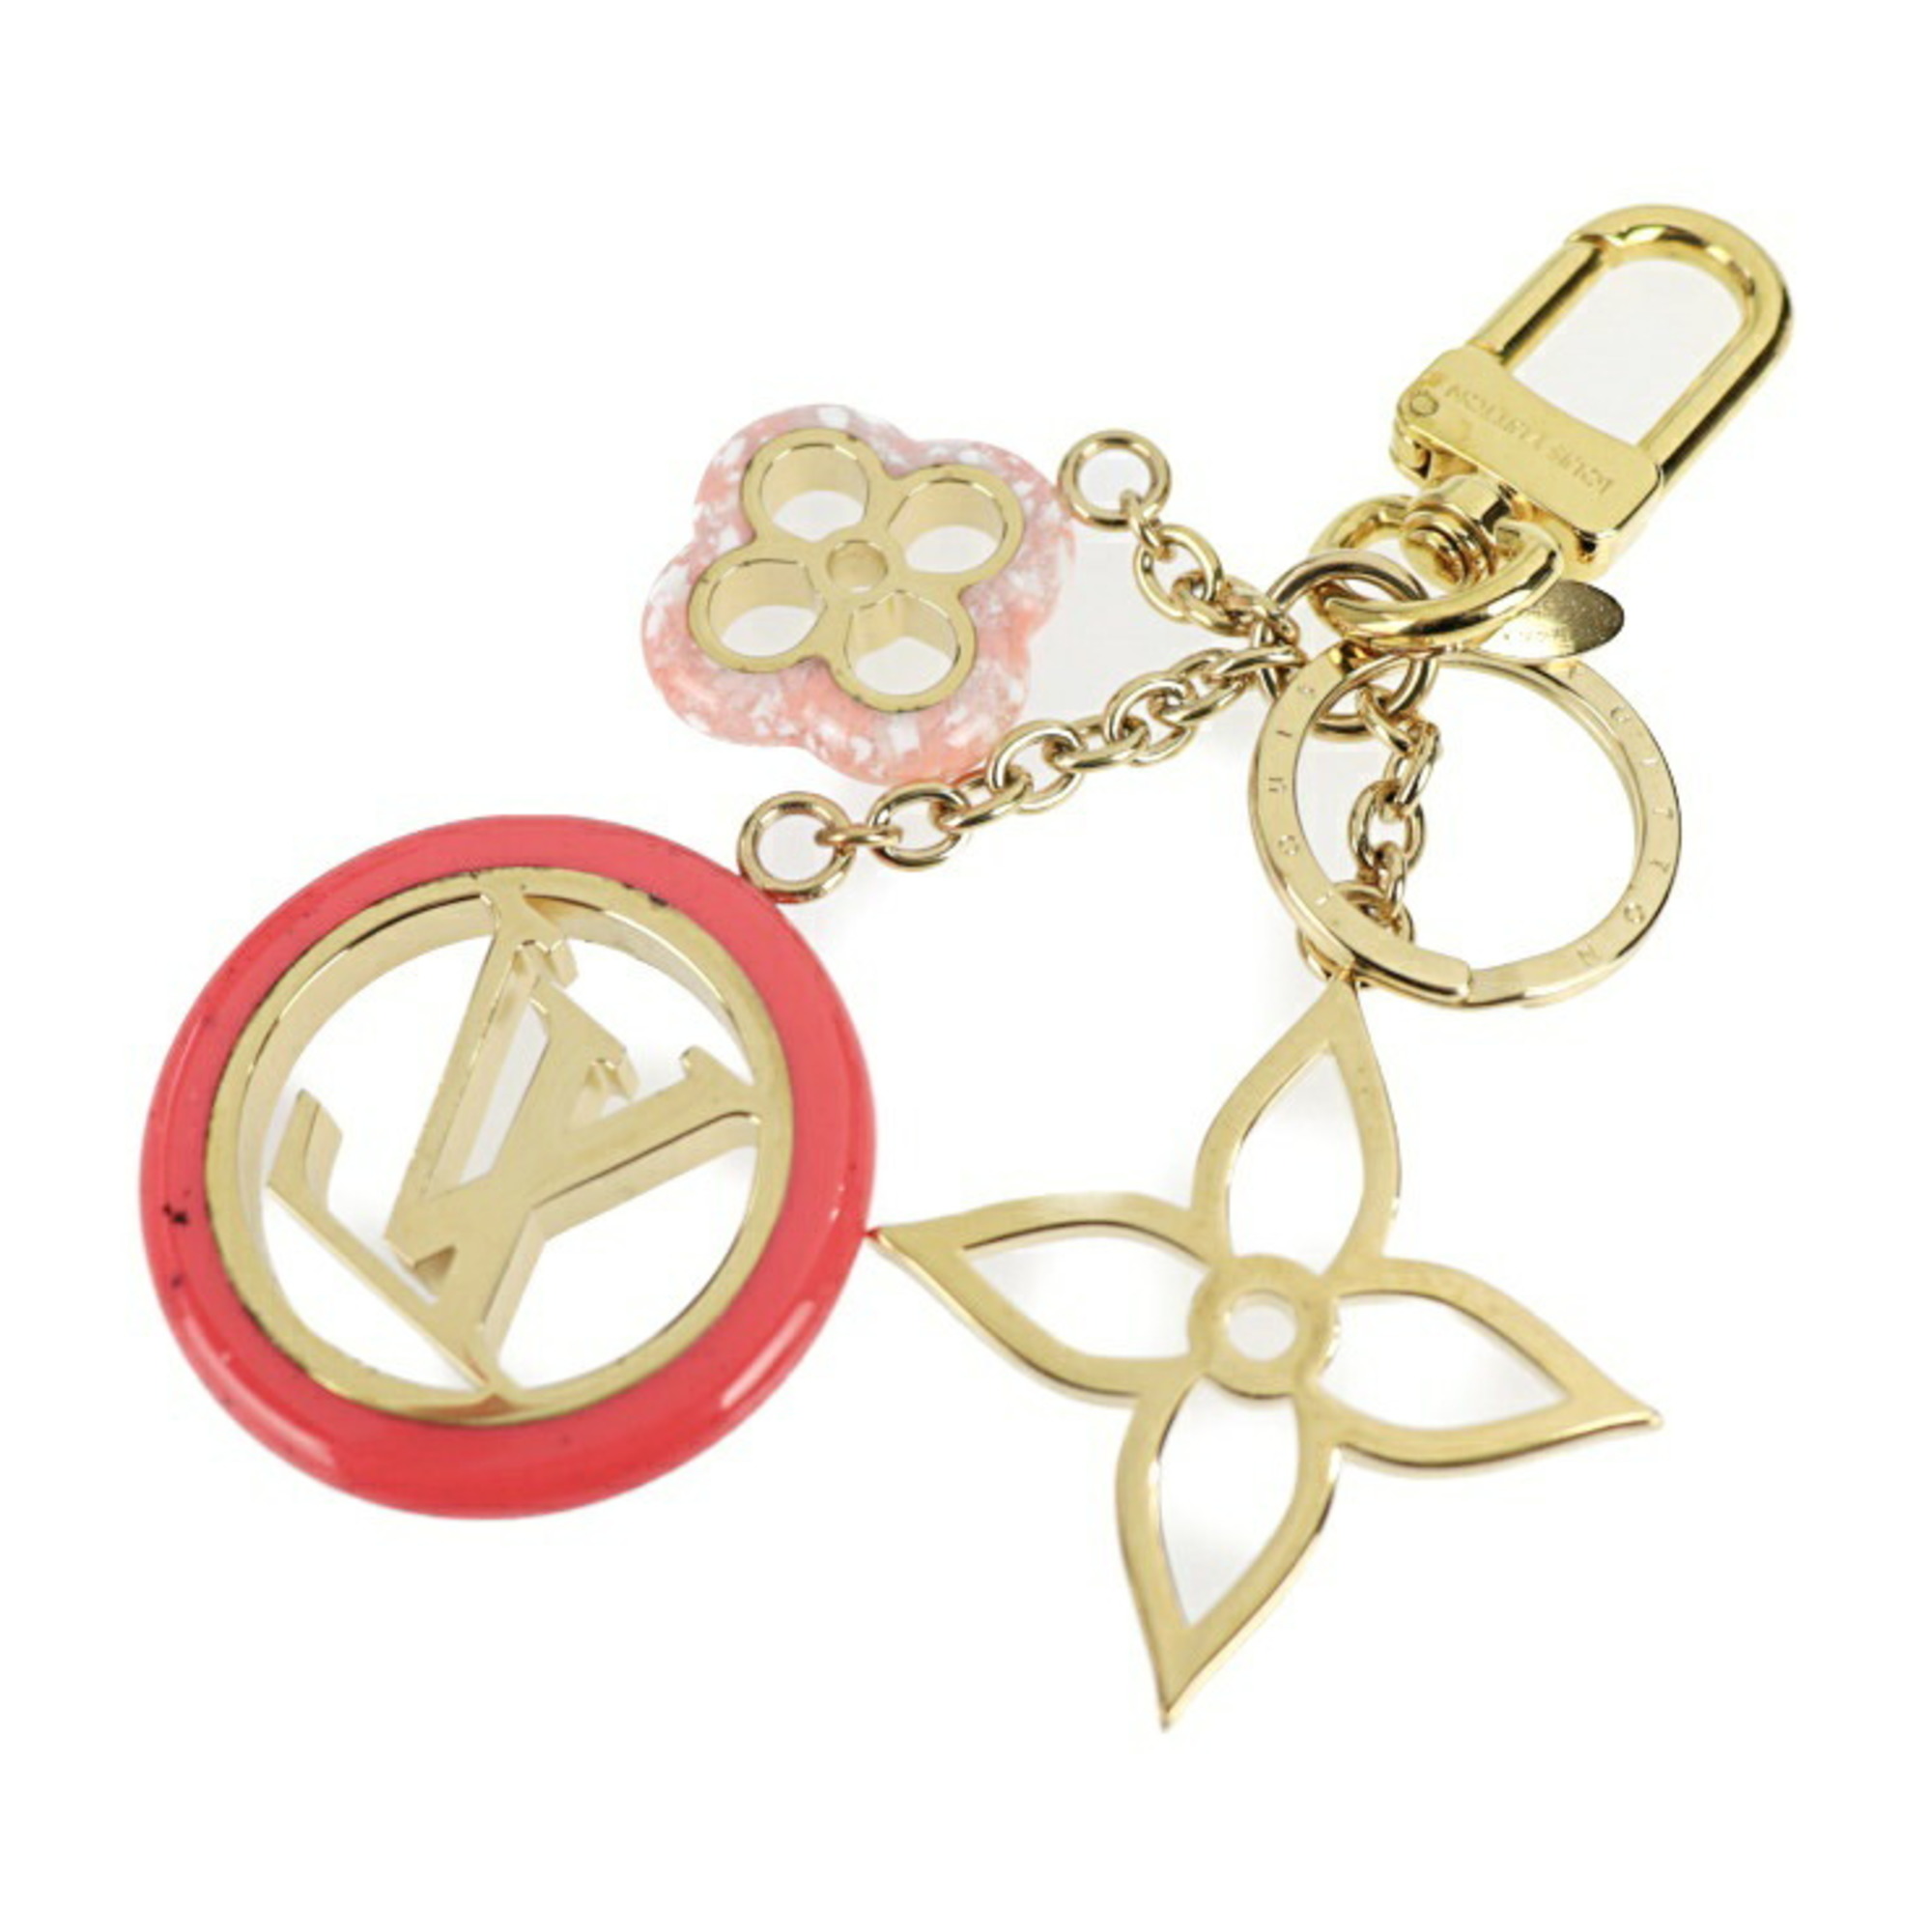 Authenticated Used LOUIS VUITTON Louis Vuitton Portocre Color Line Key  Holder M64525 Metal Resin Pink Gold Ring Bag Charm